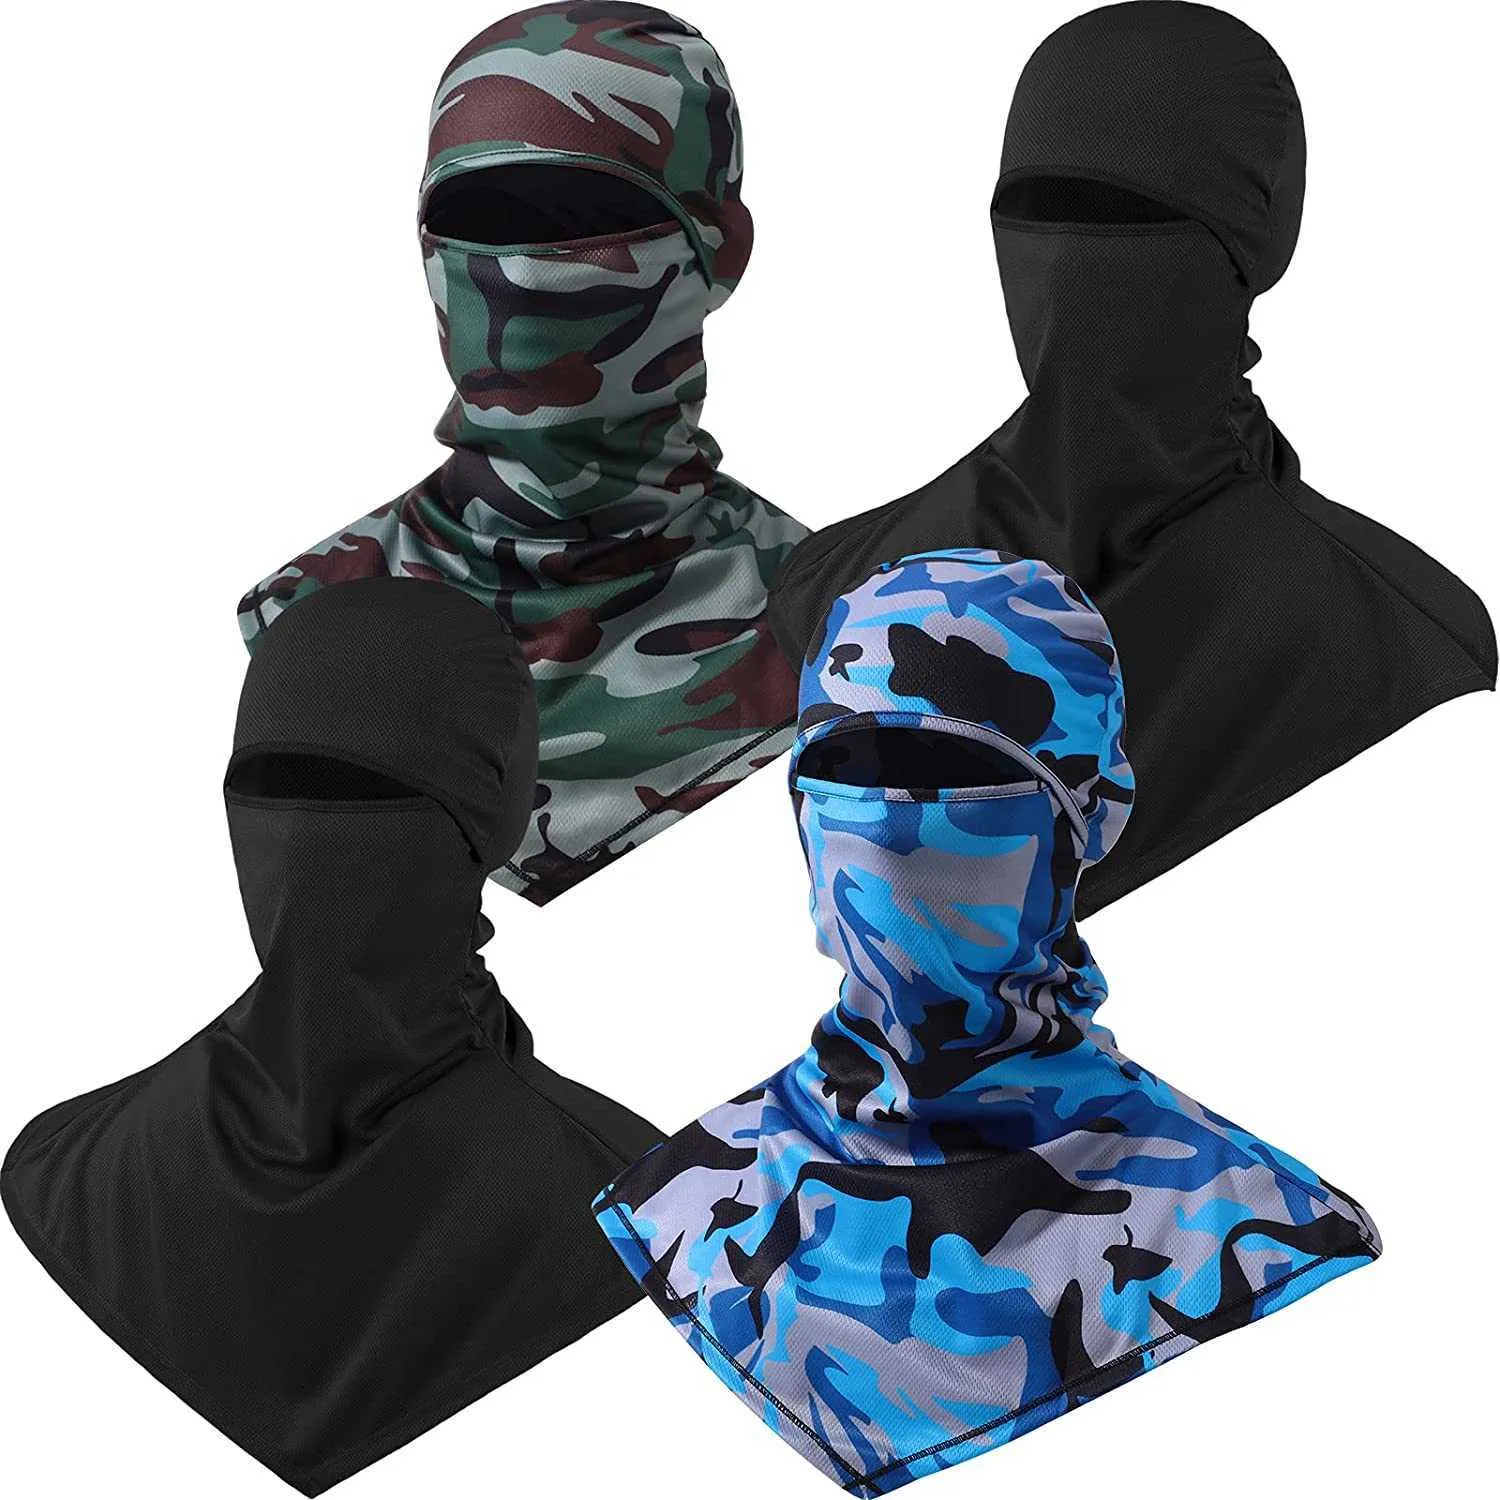 Breathable Balaclava Face Mask For Sun Protection Long Neck Covers For Men  And Women Ideal For Cycling, Motorcycle Gloves, Fishing, Skiing, And  Snowboarding W0418 From Us_georgia, $4.21